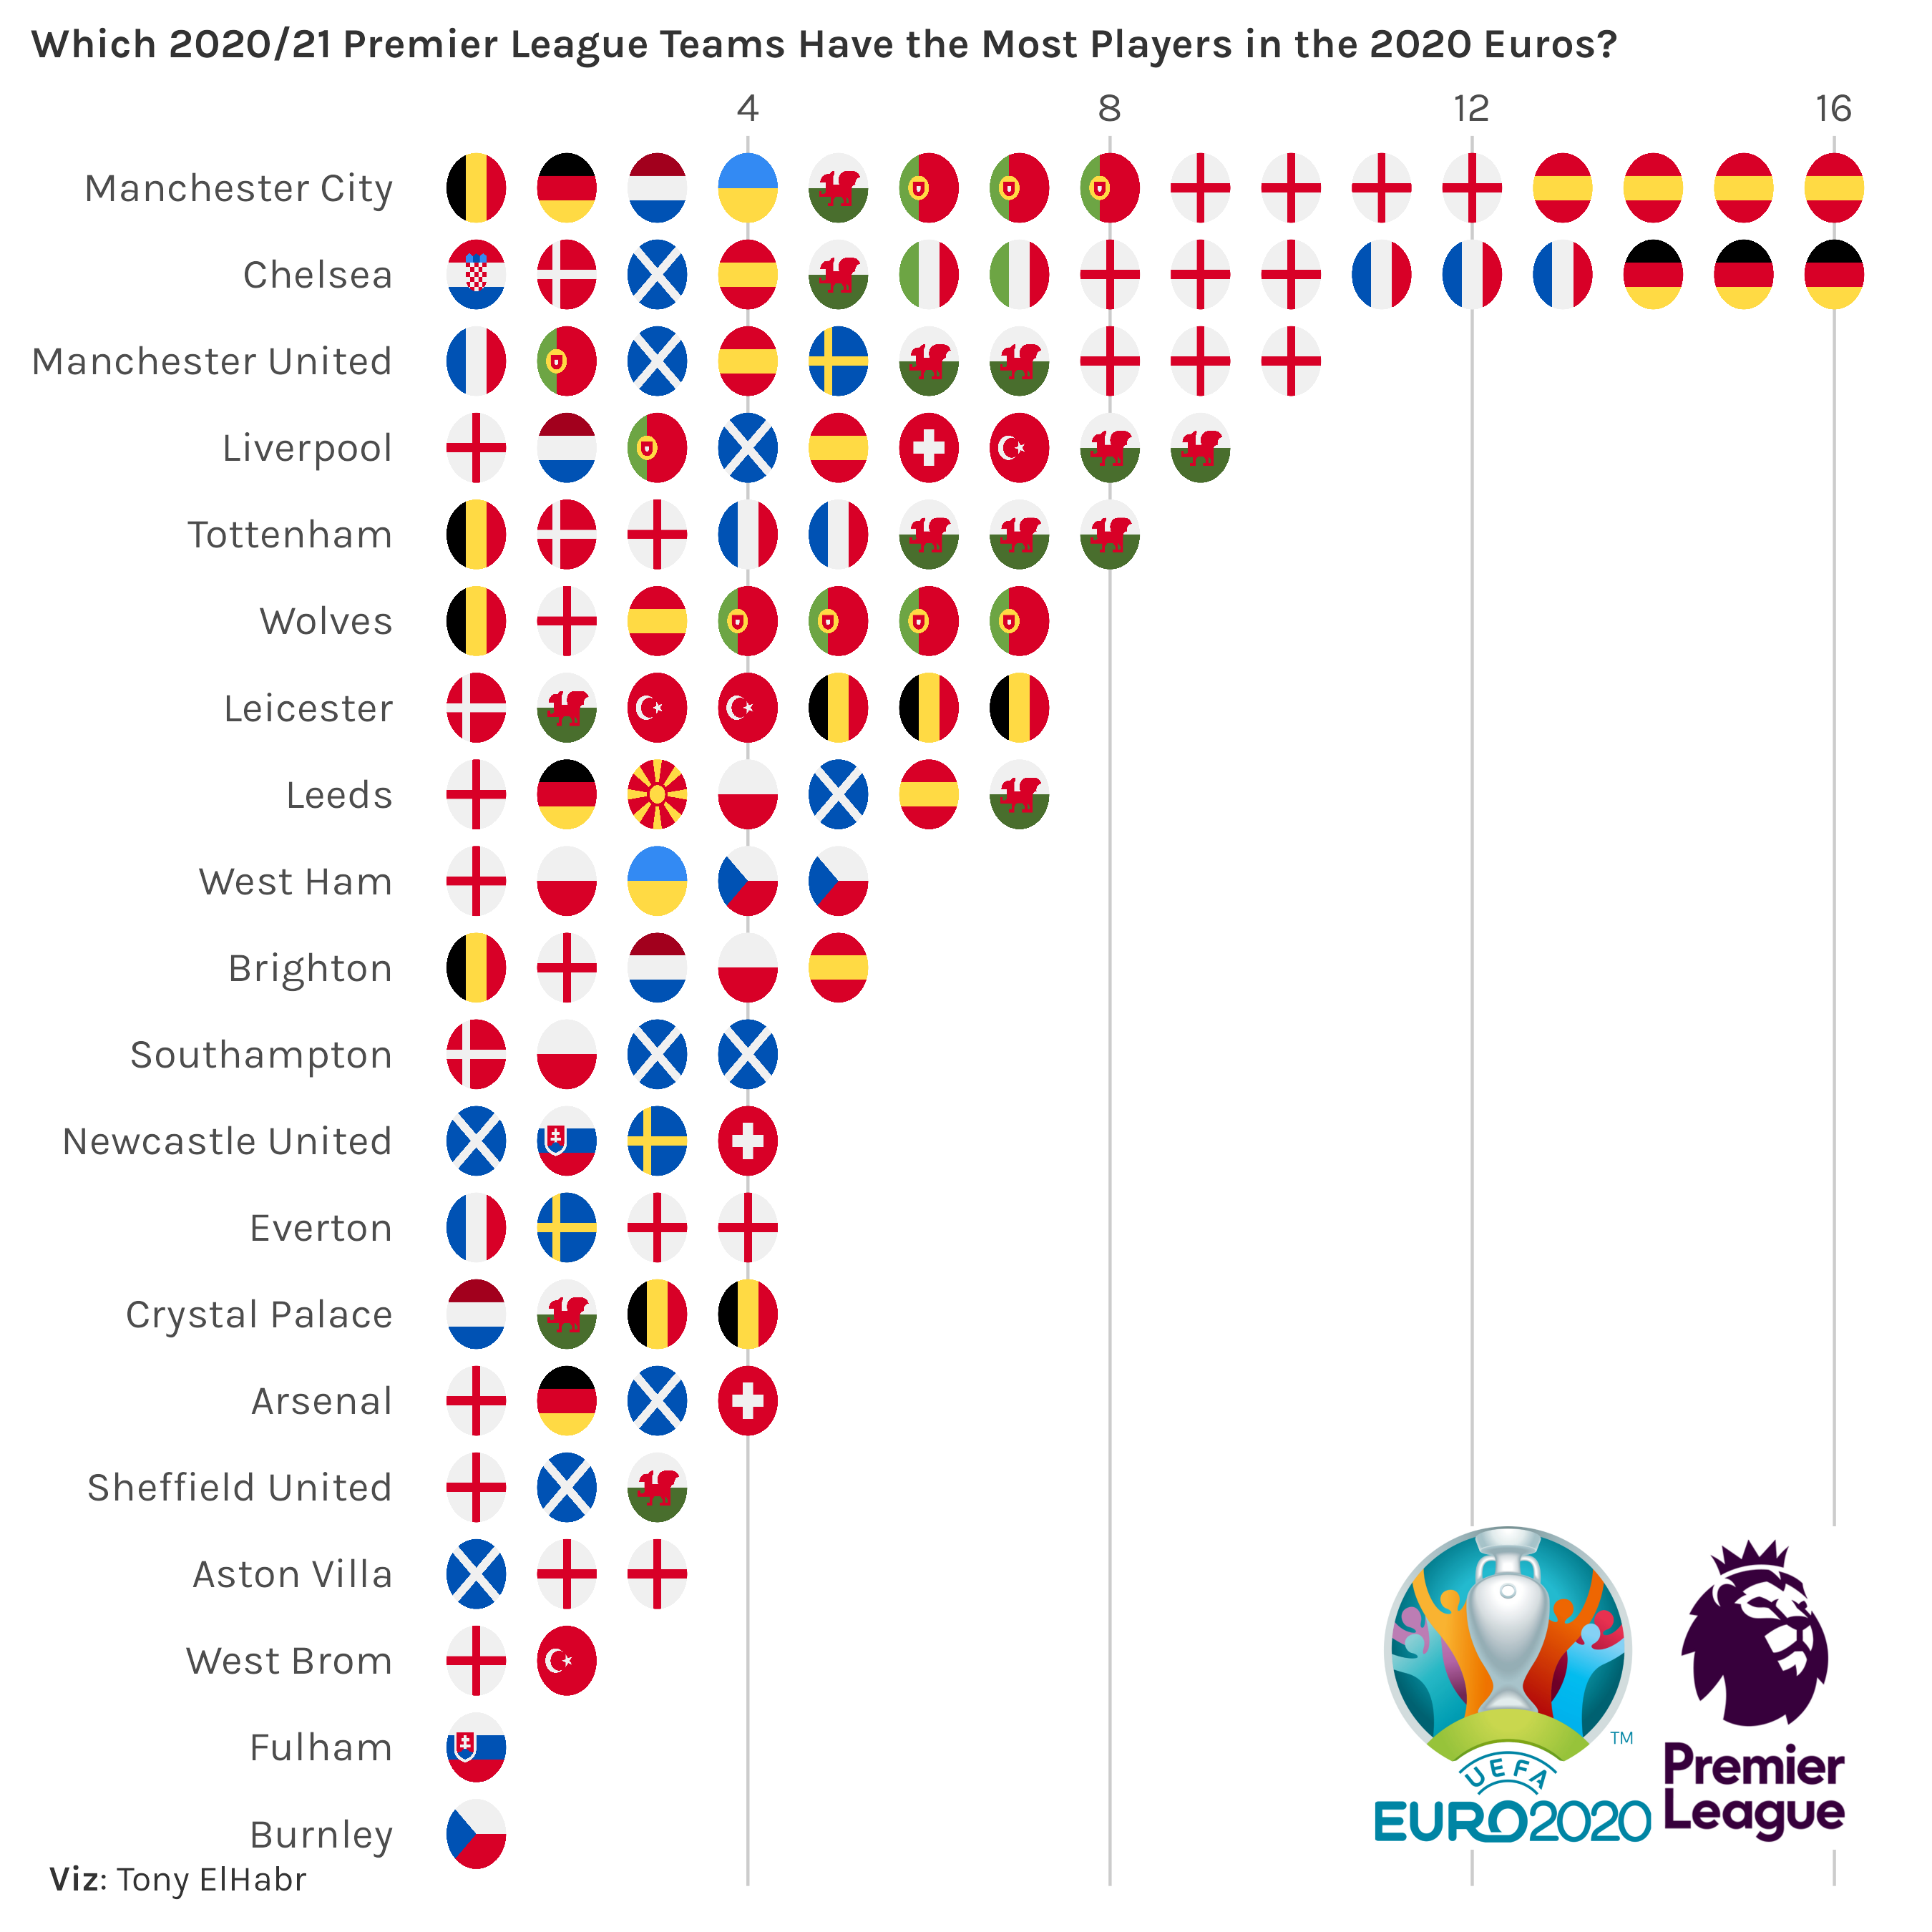 Which 2020/21 Premier League Teams Have the Most Players in the 2020 Euros?